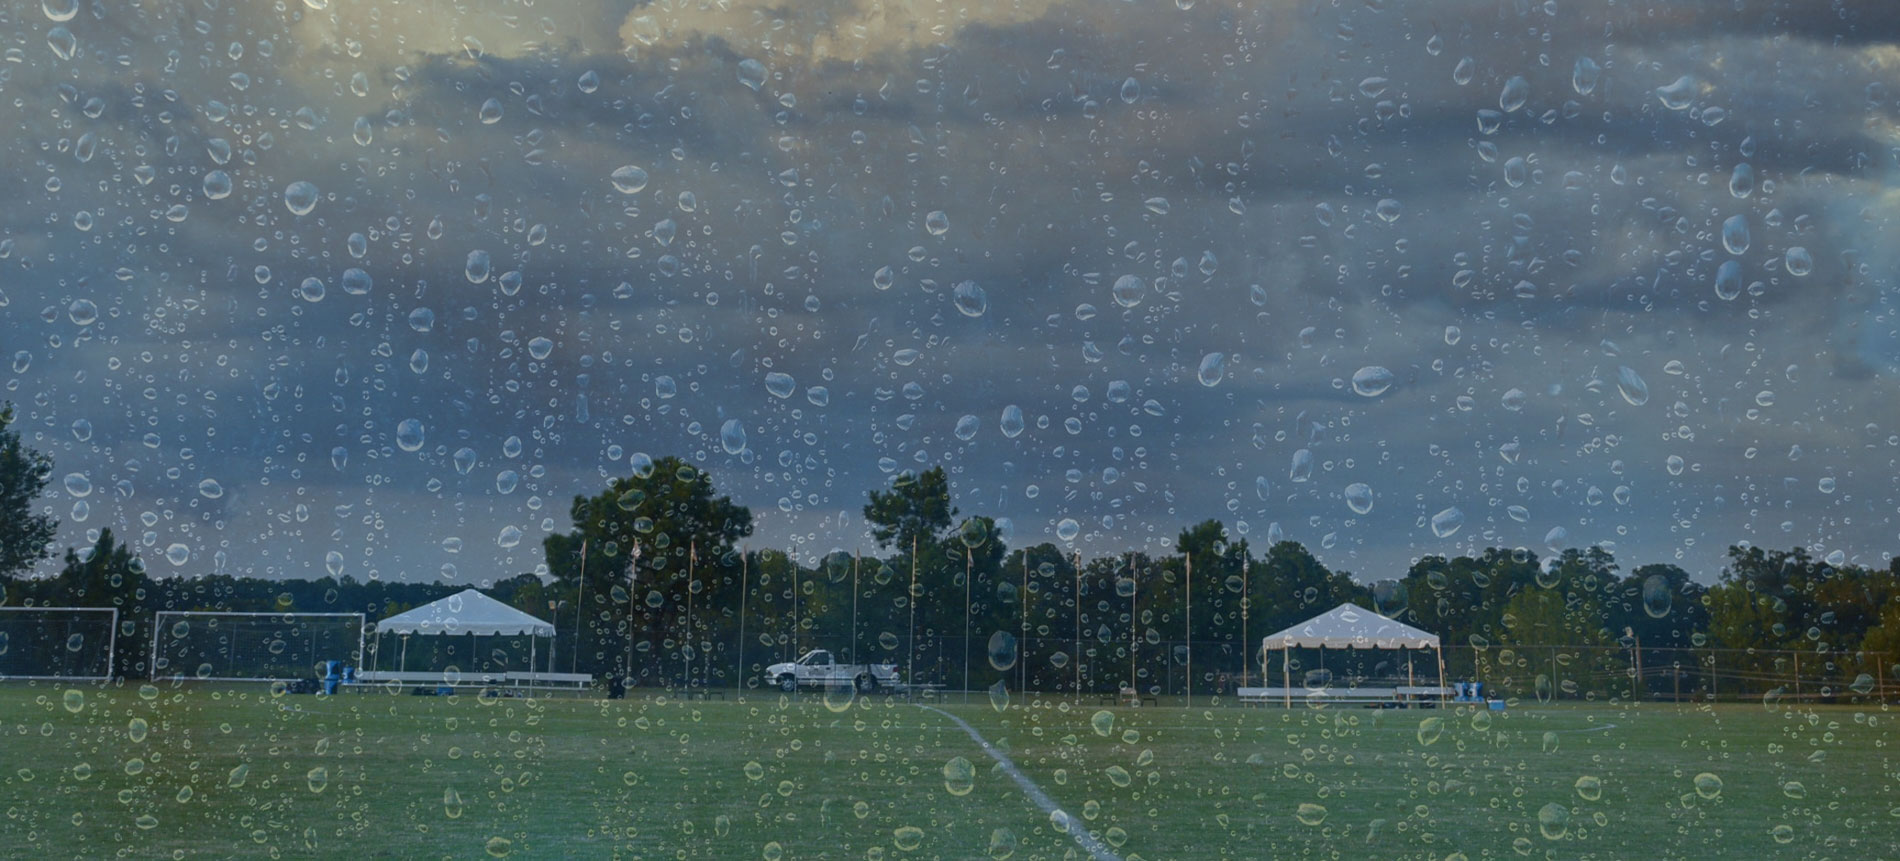 Women’s Soccer Opening Weekend Altered by Inclement Weather